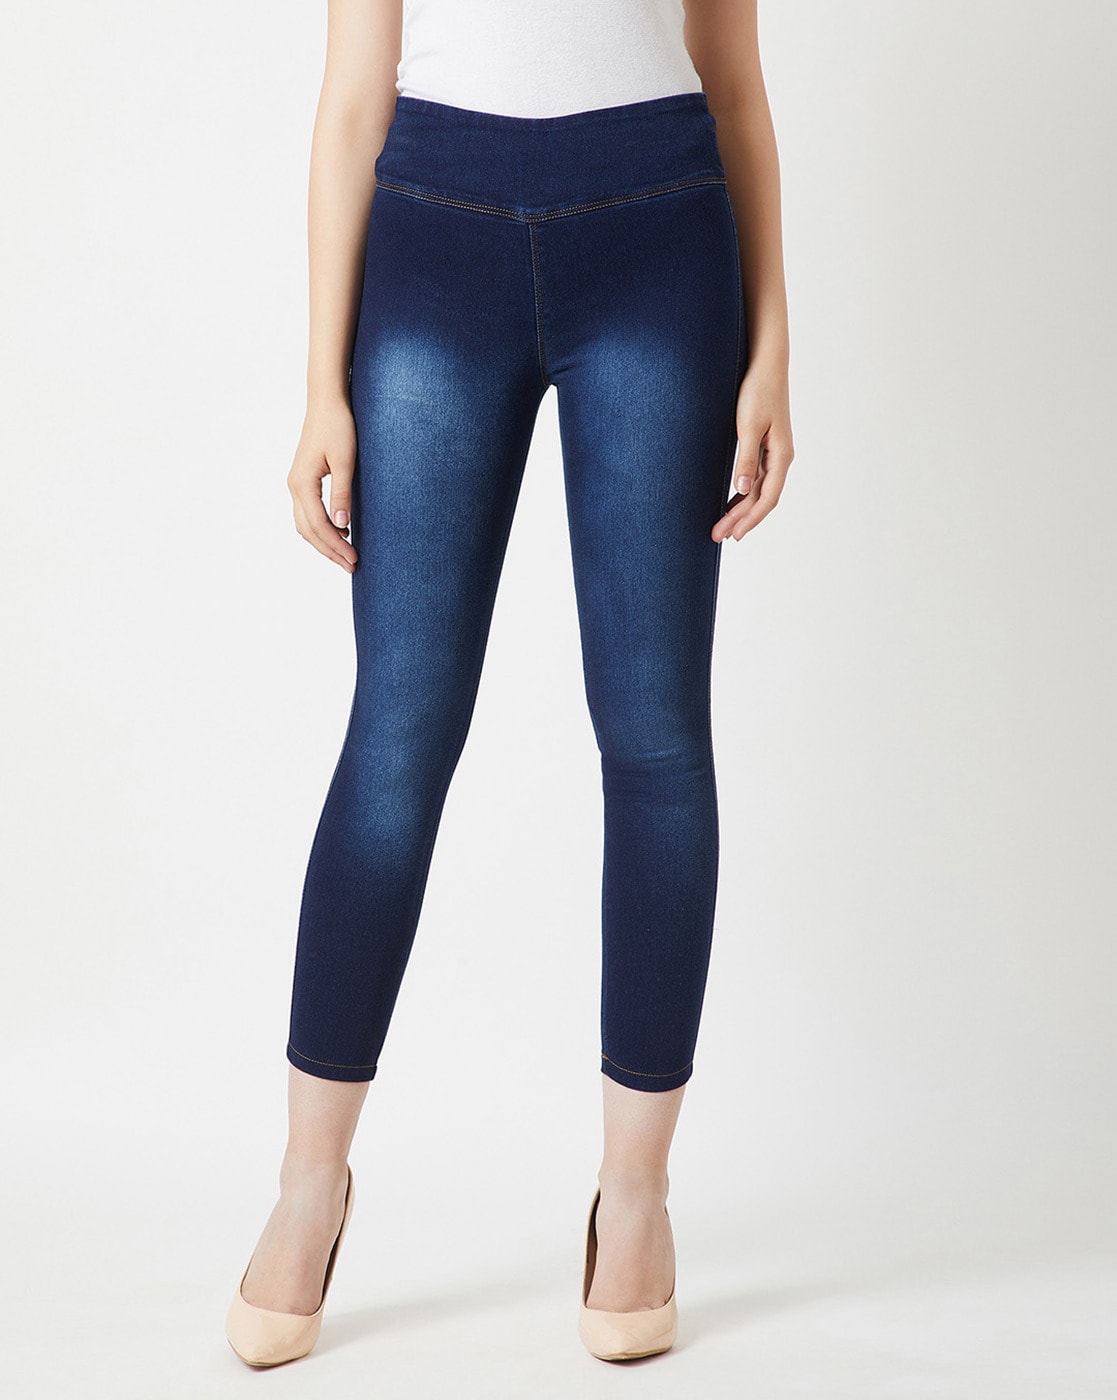 Buy Navy Blue Jeans & Jeggings for Women by MISS CHASE Online